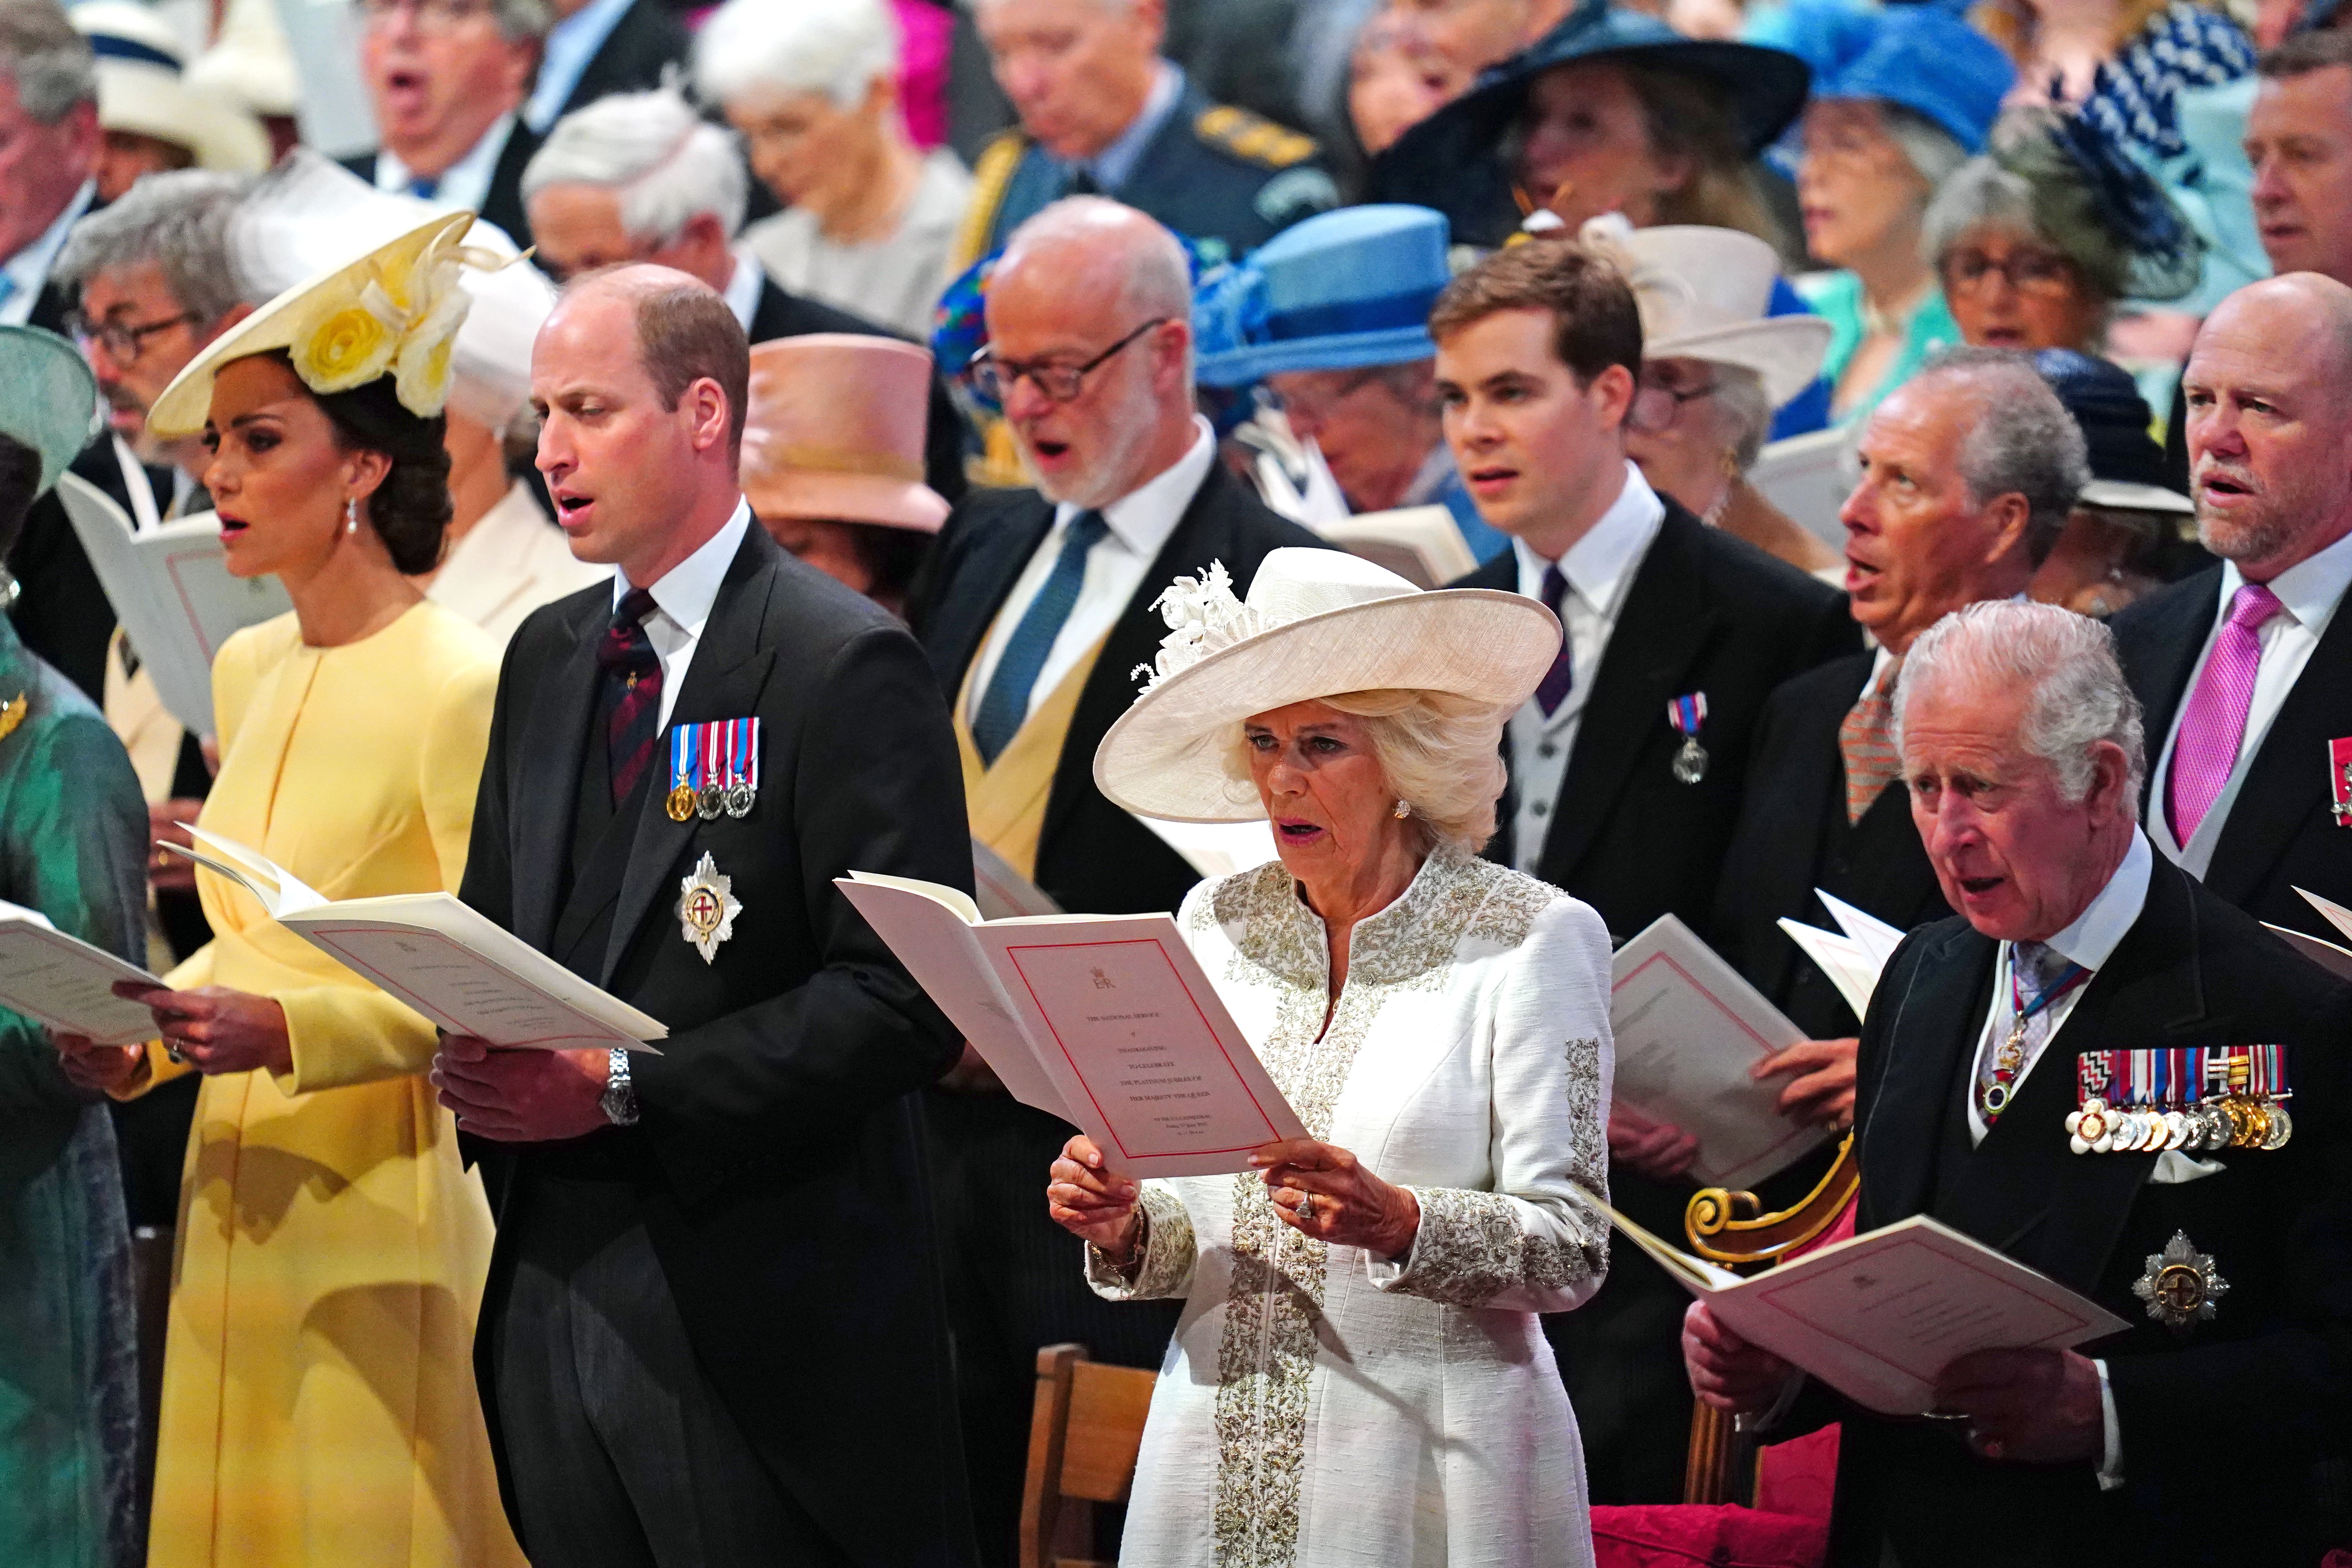 Duchess Kate, Prince William, Duchess Camilla, and Prince Charles at the National Service of Thanksgiving to celebrate the Platinum Jubilee of the Queen at St Paul's Cathedral on June 3, 2022, in London, England. | Source: Getty Images